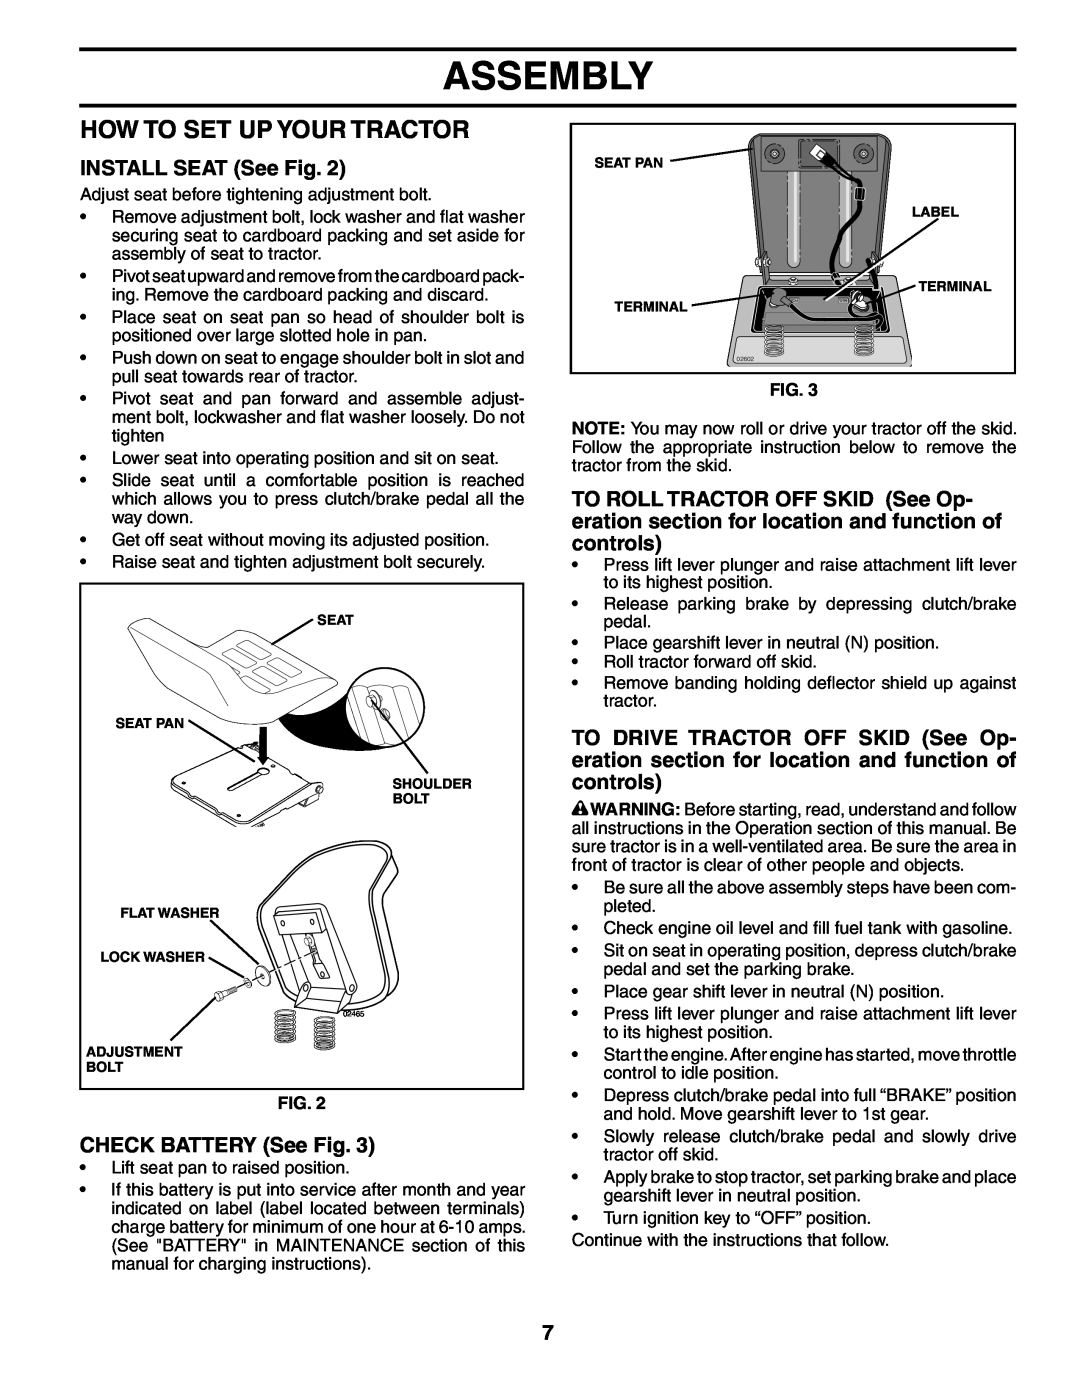 Poulan 192087 manual How To Set Up Your Tractor, INSTALL SEAT See Fig, CHECK BATTERY See Fig, Assembly 